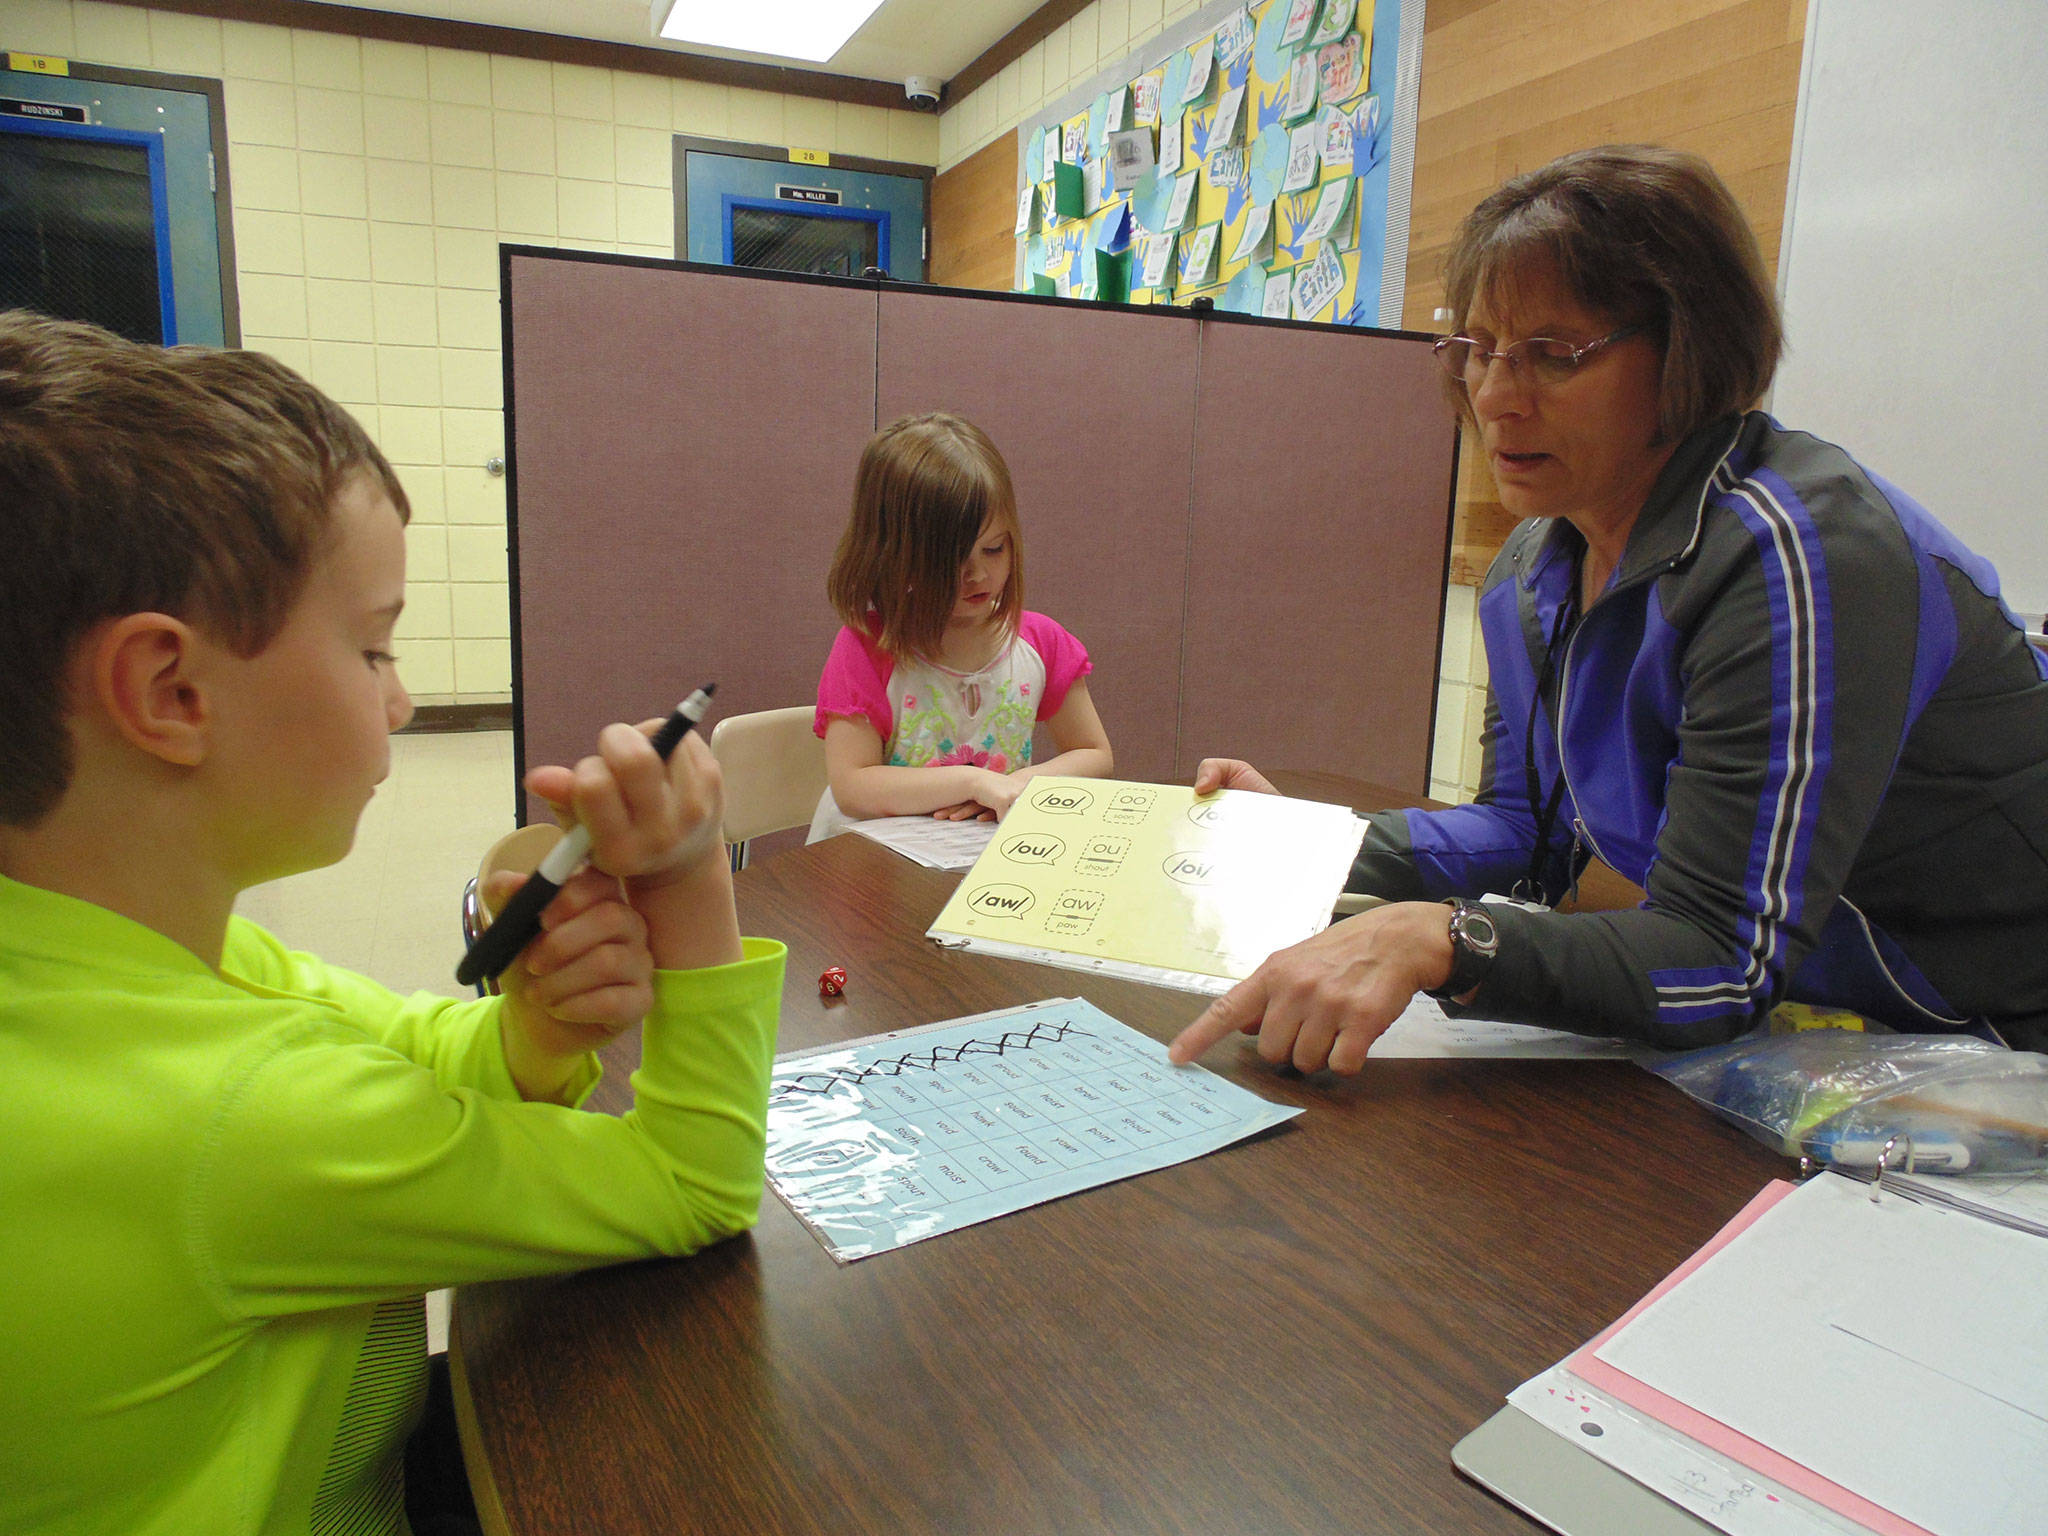 Paraeducators in Sequim School District already meet new paraeducator employment requirements which allow paraeducators to switch between duties and programs. Reading paraeducator Jan Webb works with Xavier Devlin and Alexia Brock at Helen Haller Elementary School. Submitted photo